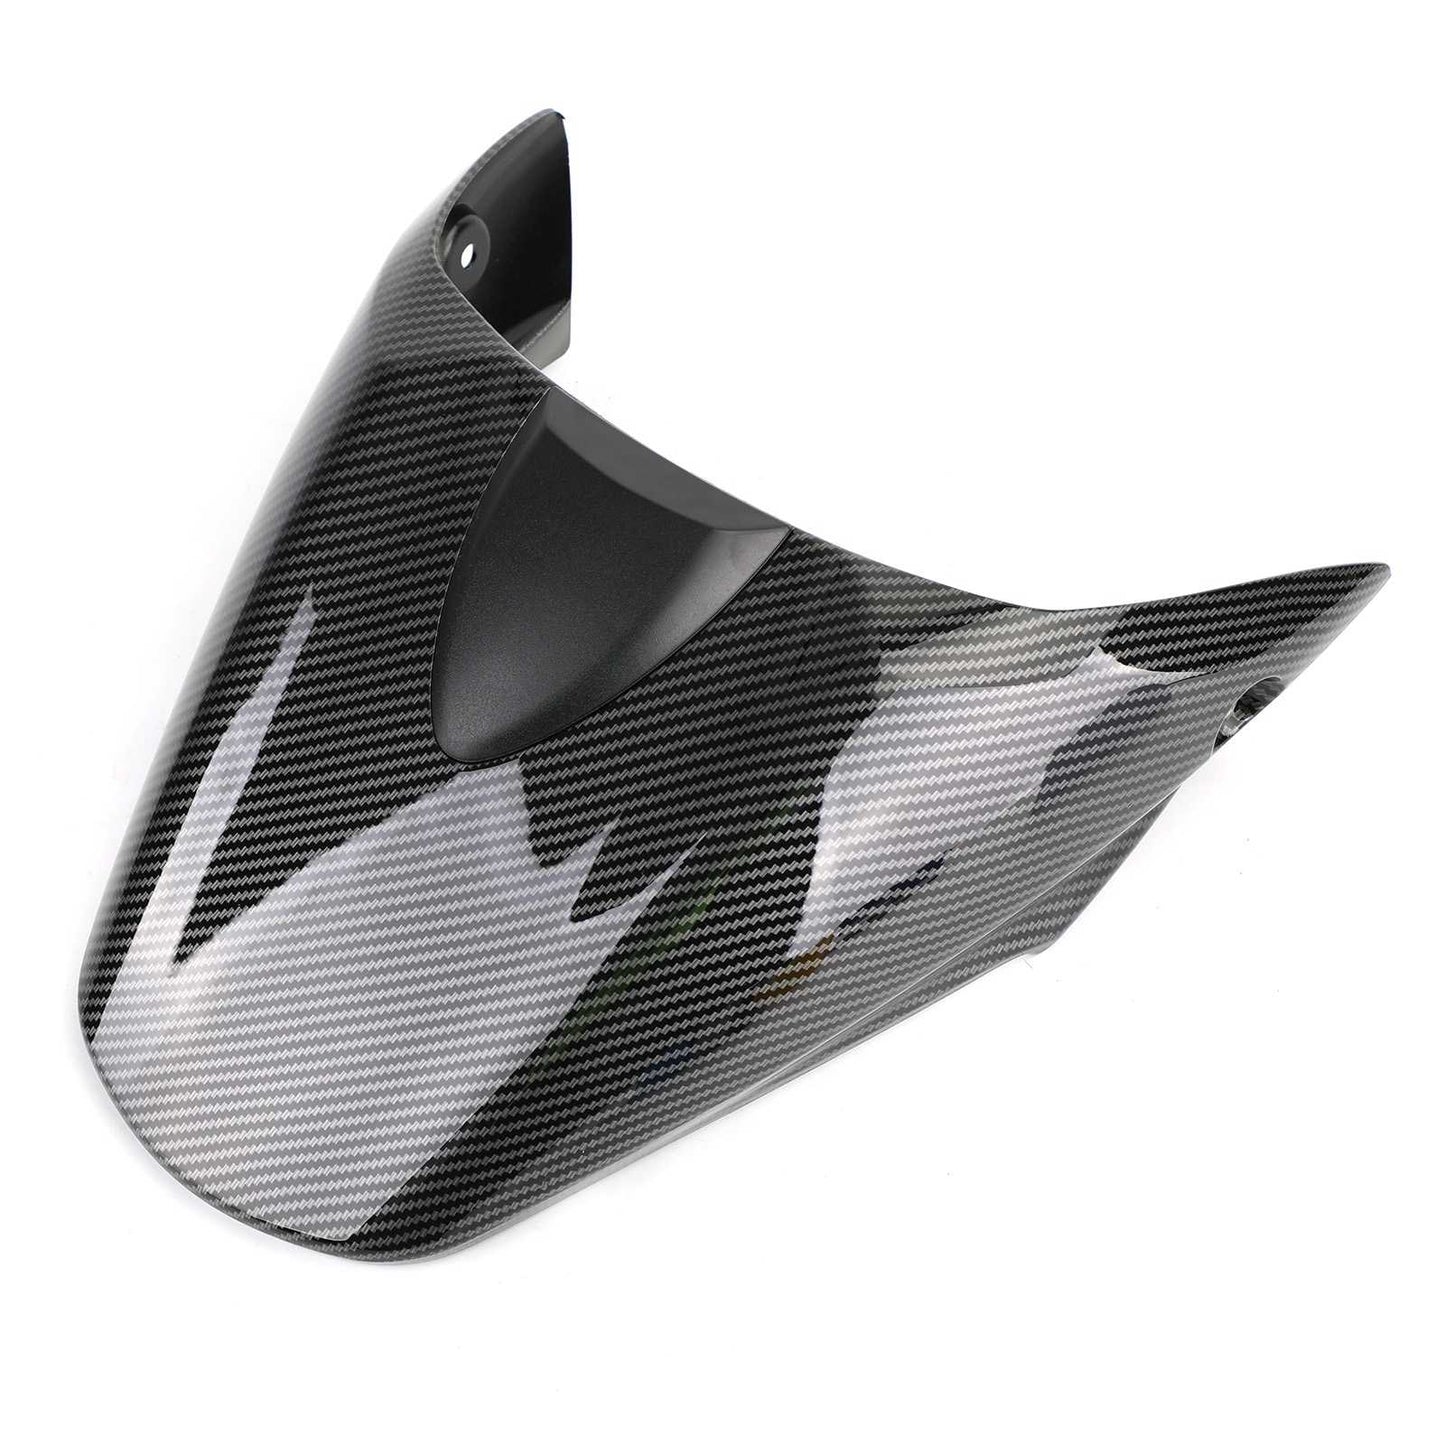 Motorcycle Rear Seat Fairing Cover Cowl For DUCATI 796 795 M1100 696 09-12 CBN